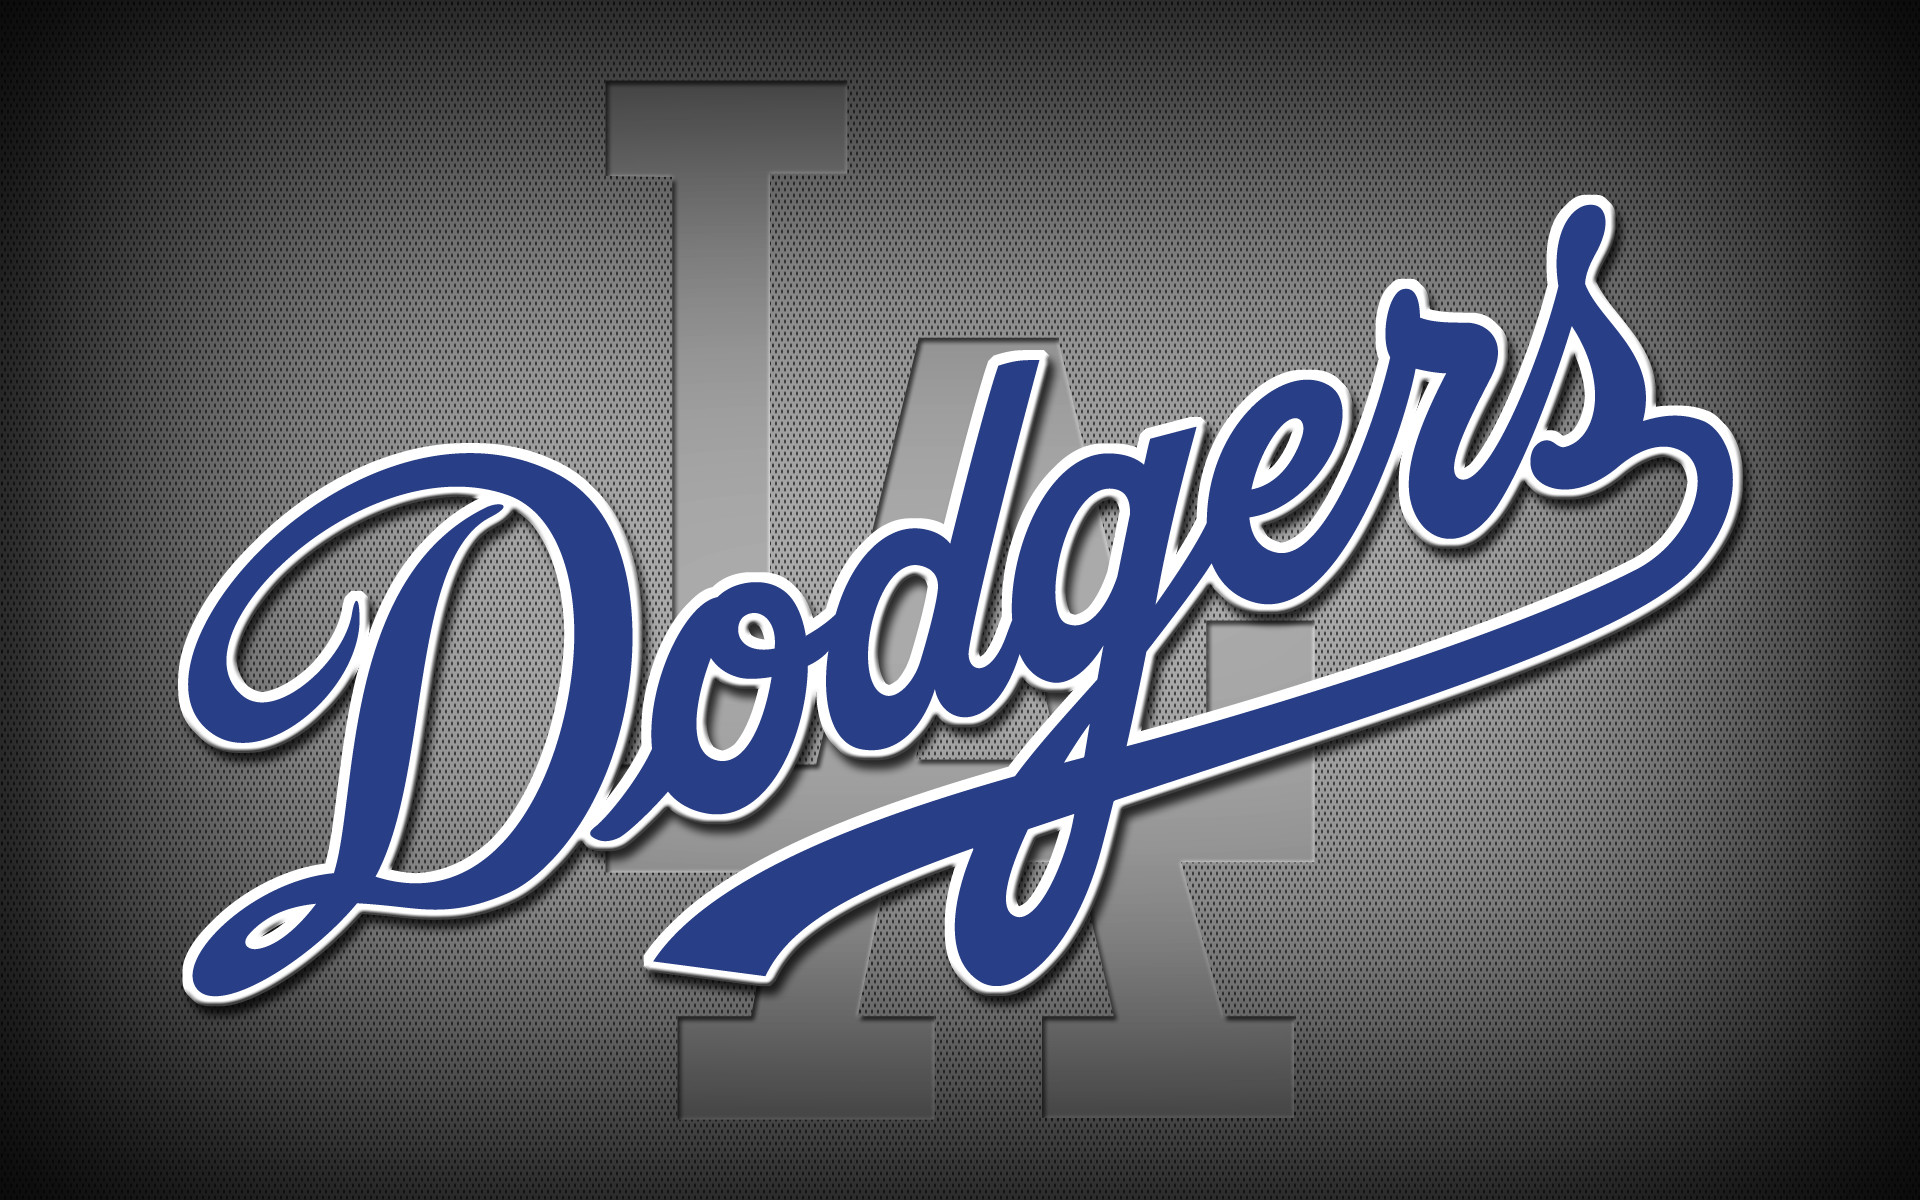 Dodgers Wallpaper for Cell Phones.